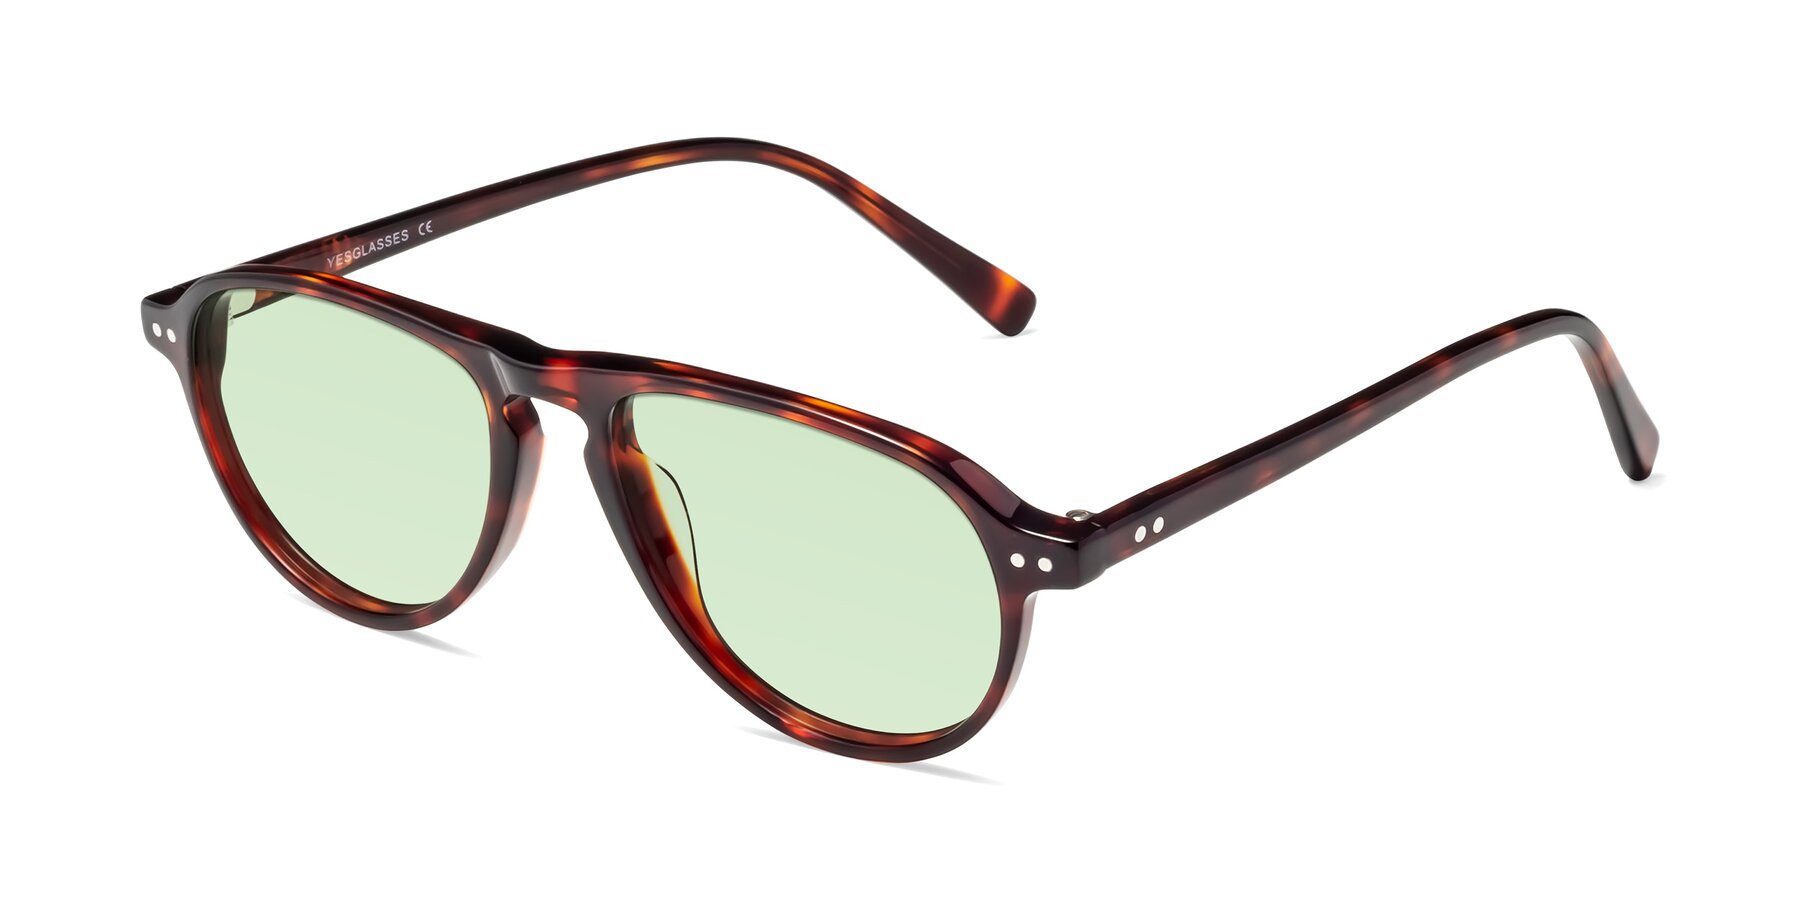 Angle of 17544 in Burgundy Tortoise with Light Green Tinted Lenses